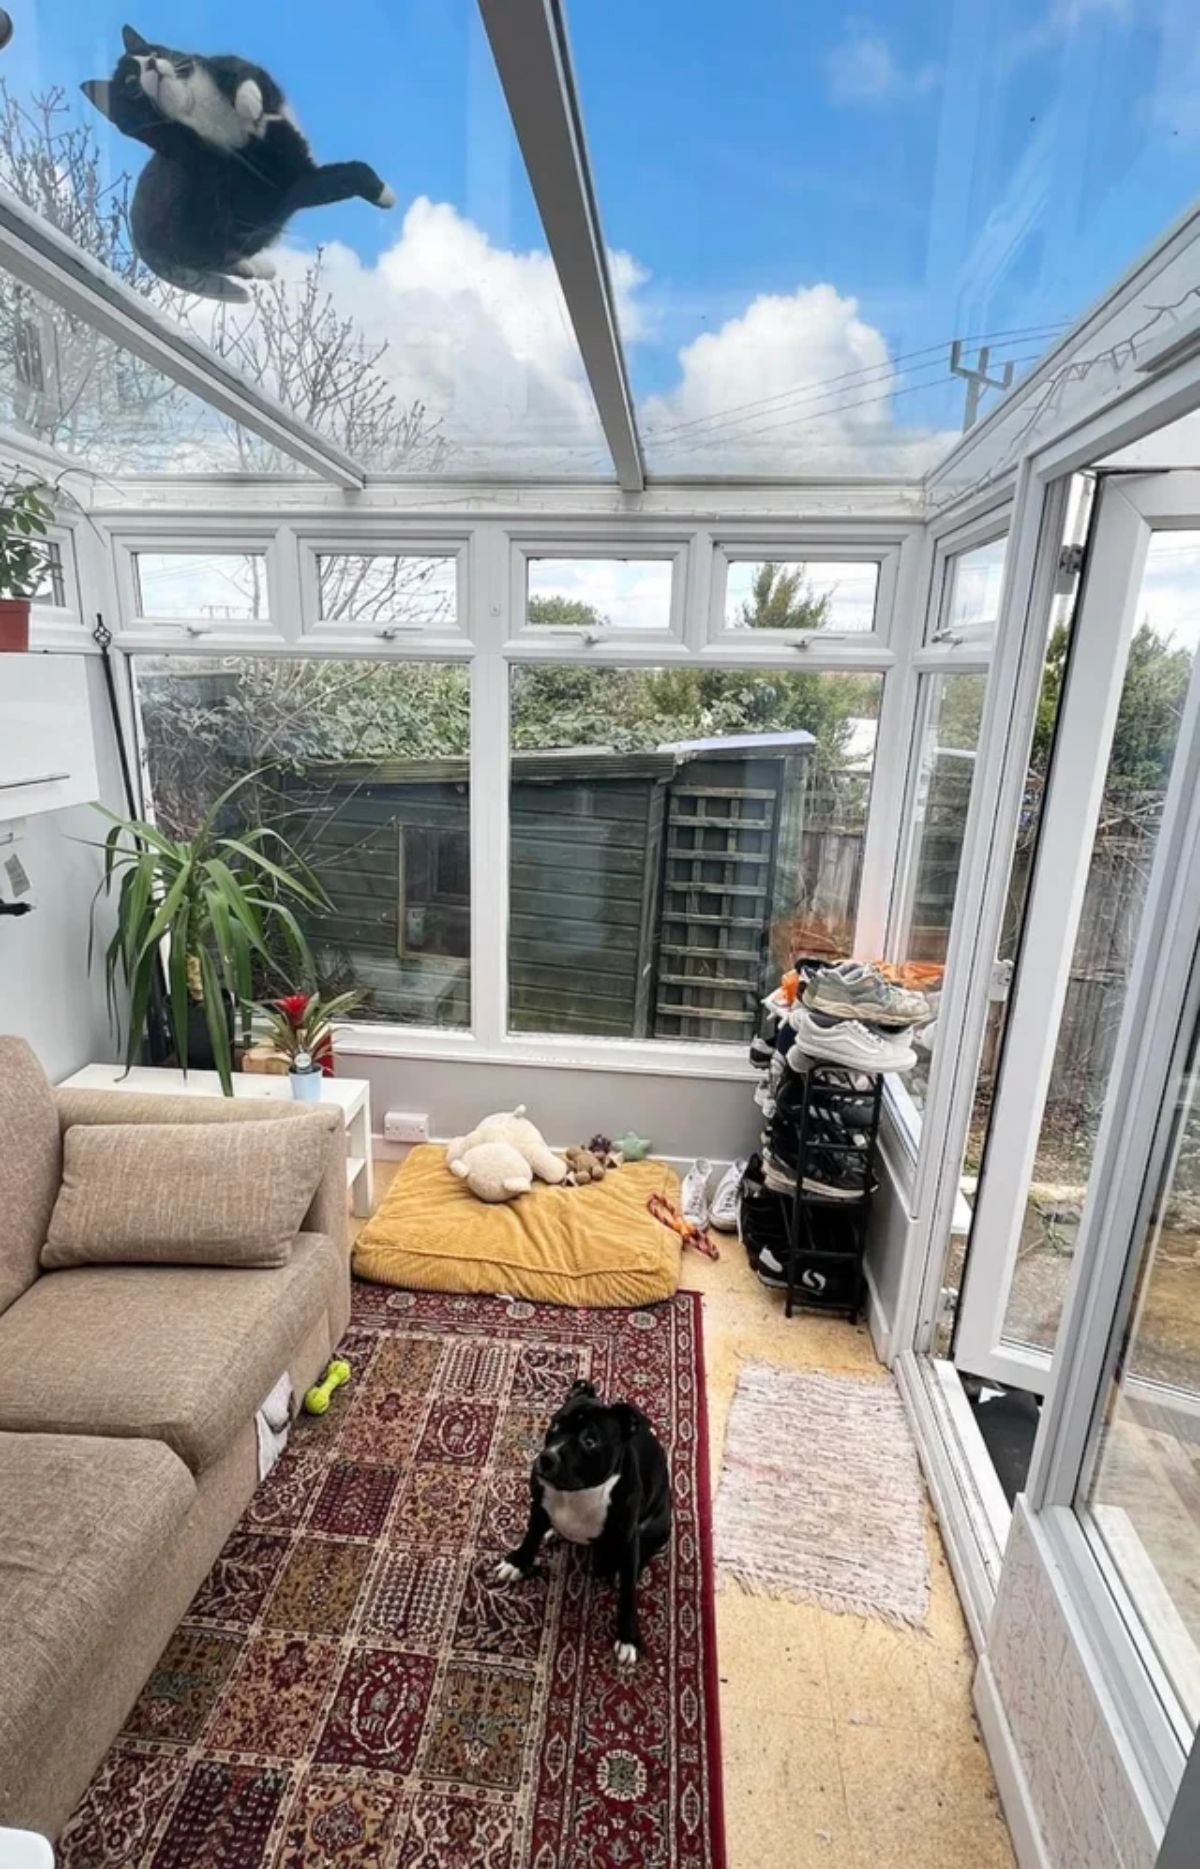 black and white tuxedo cat on a glass roof with a black and white tuxedo dog on the floor looking up at the cat